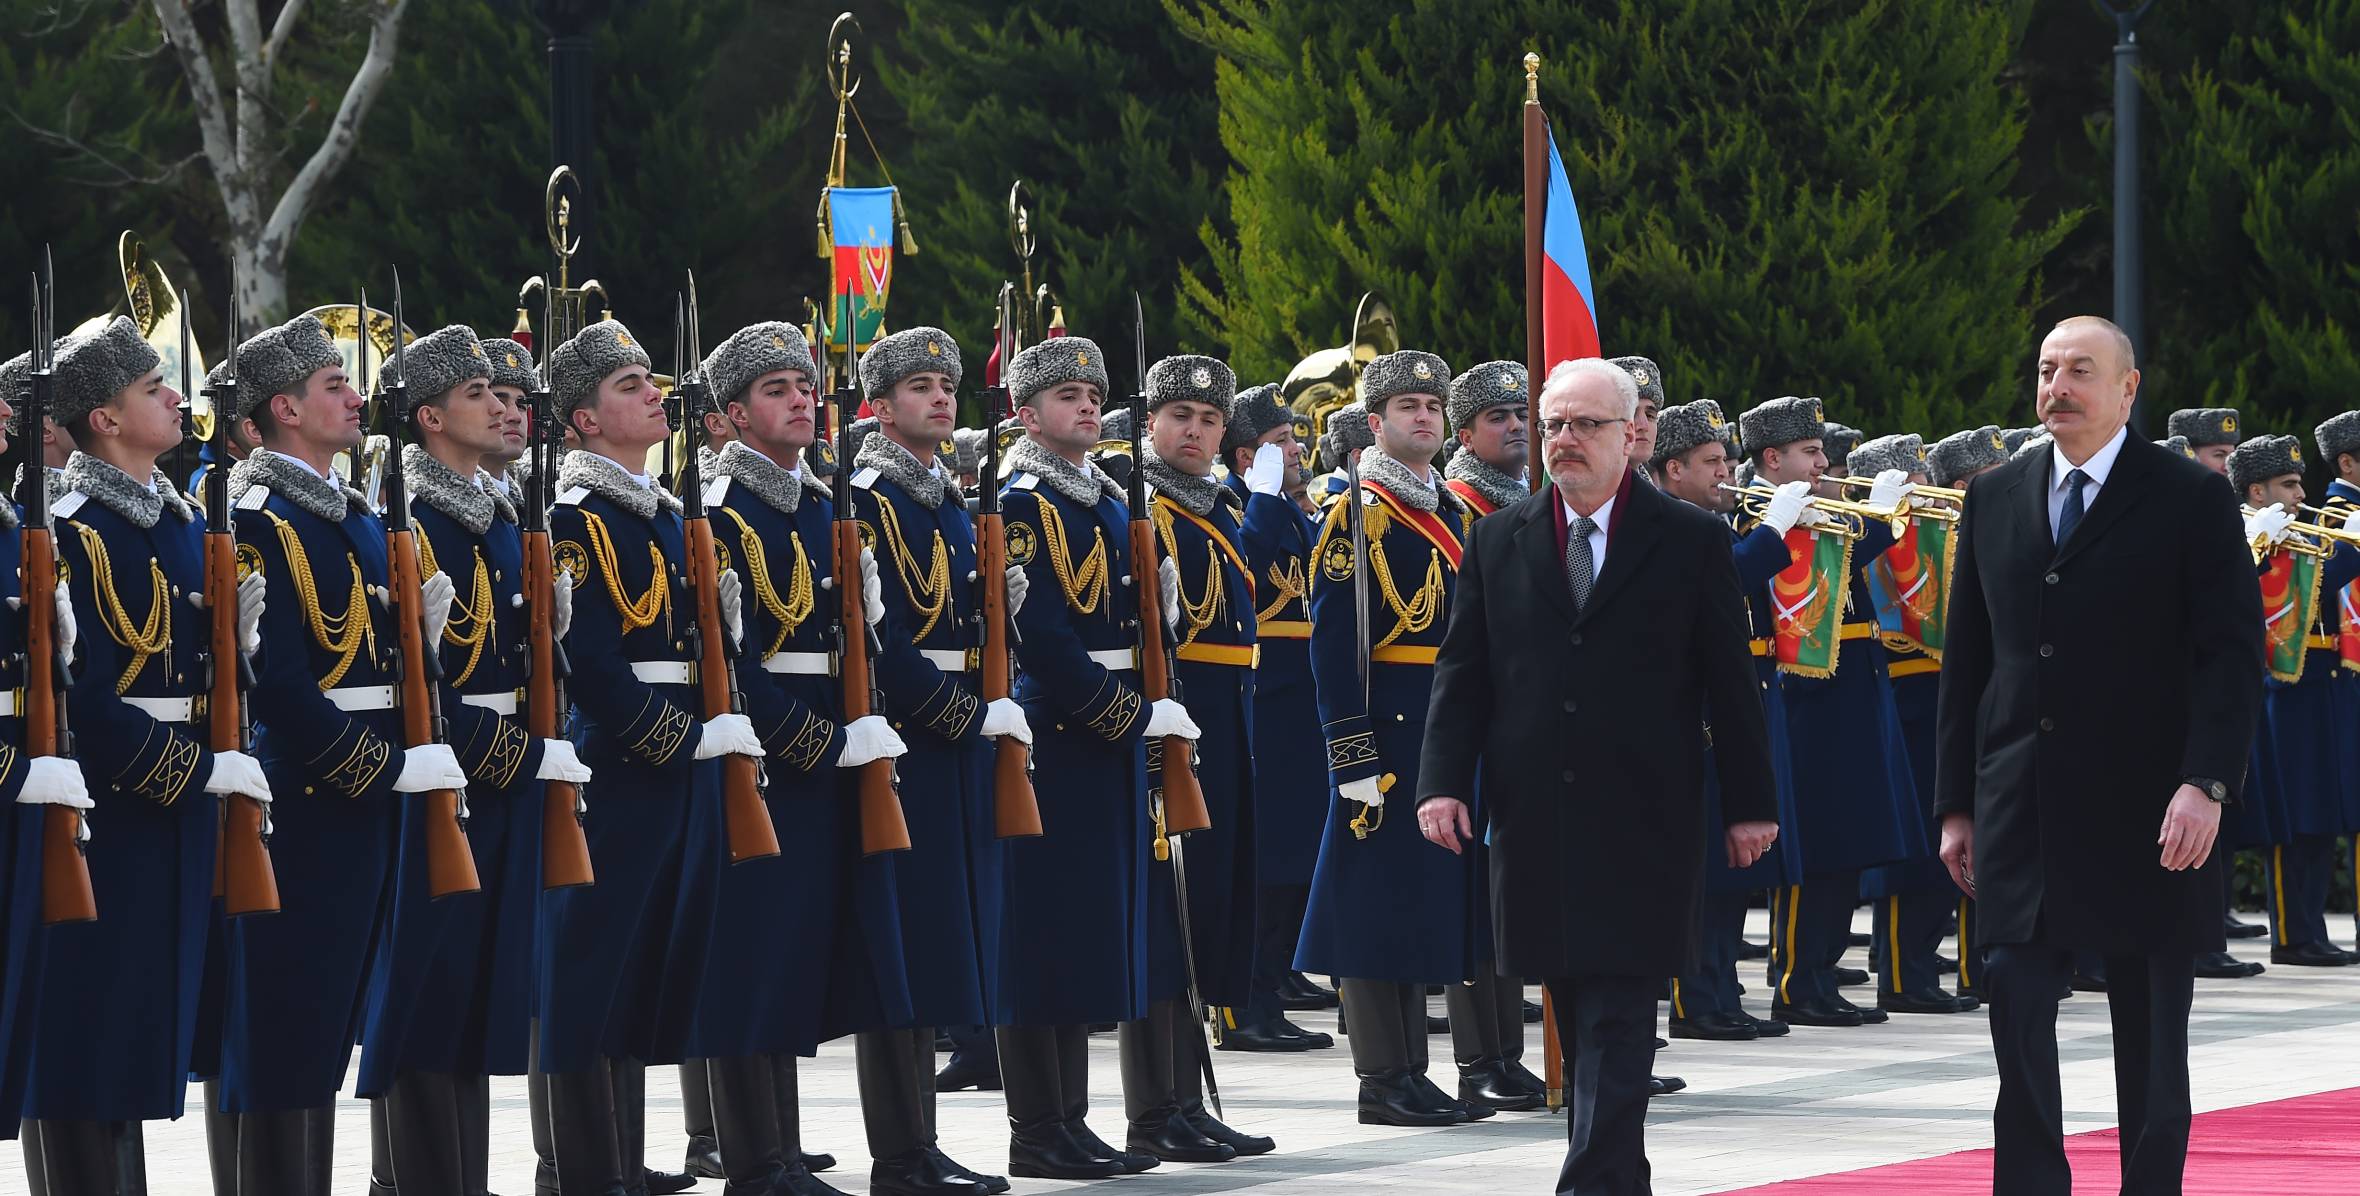 Official welcome ceremony was held for President of Latvia Egils Levits